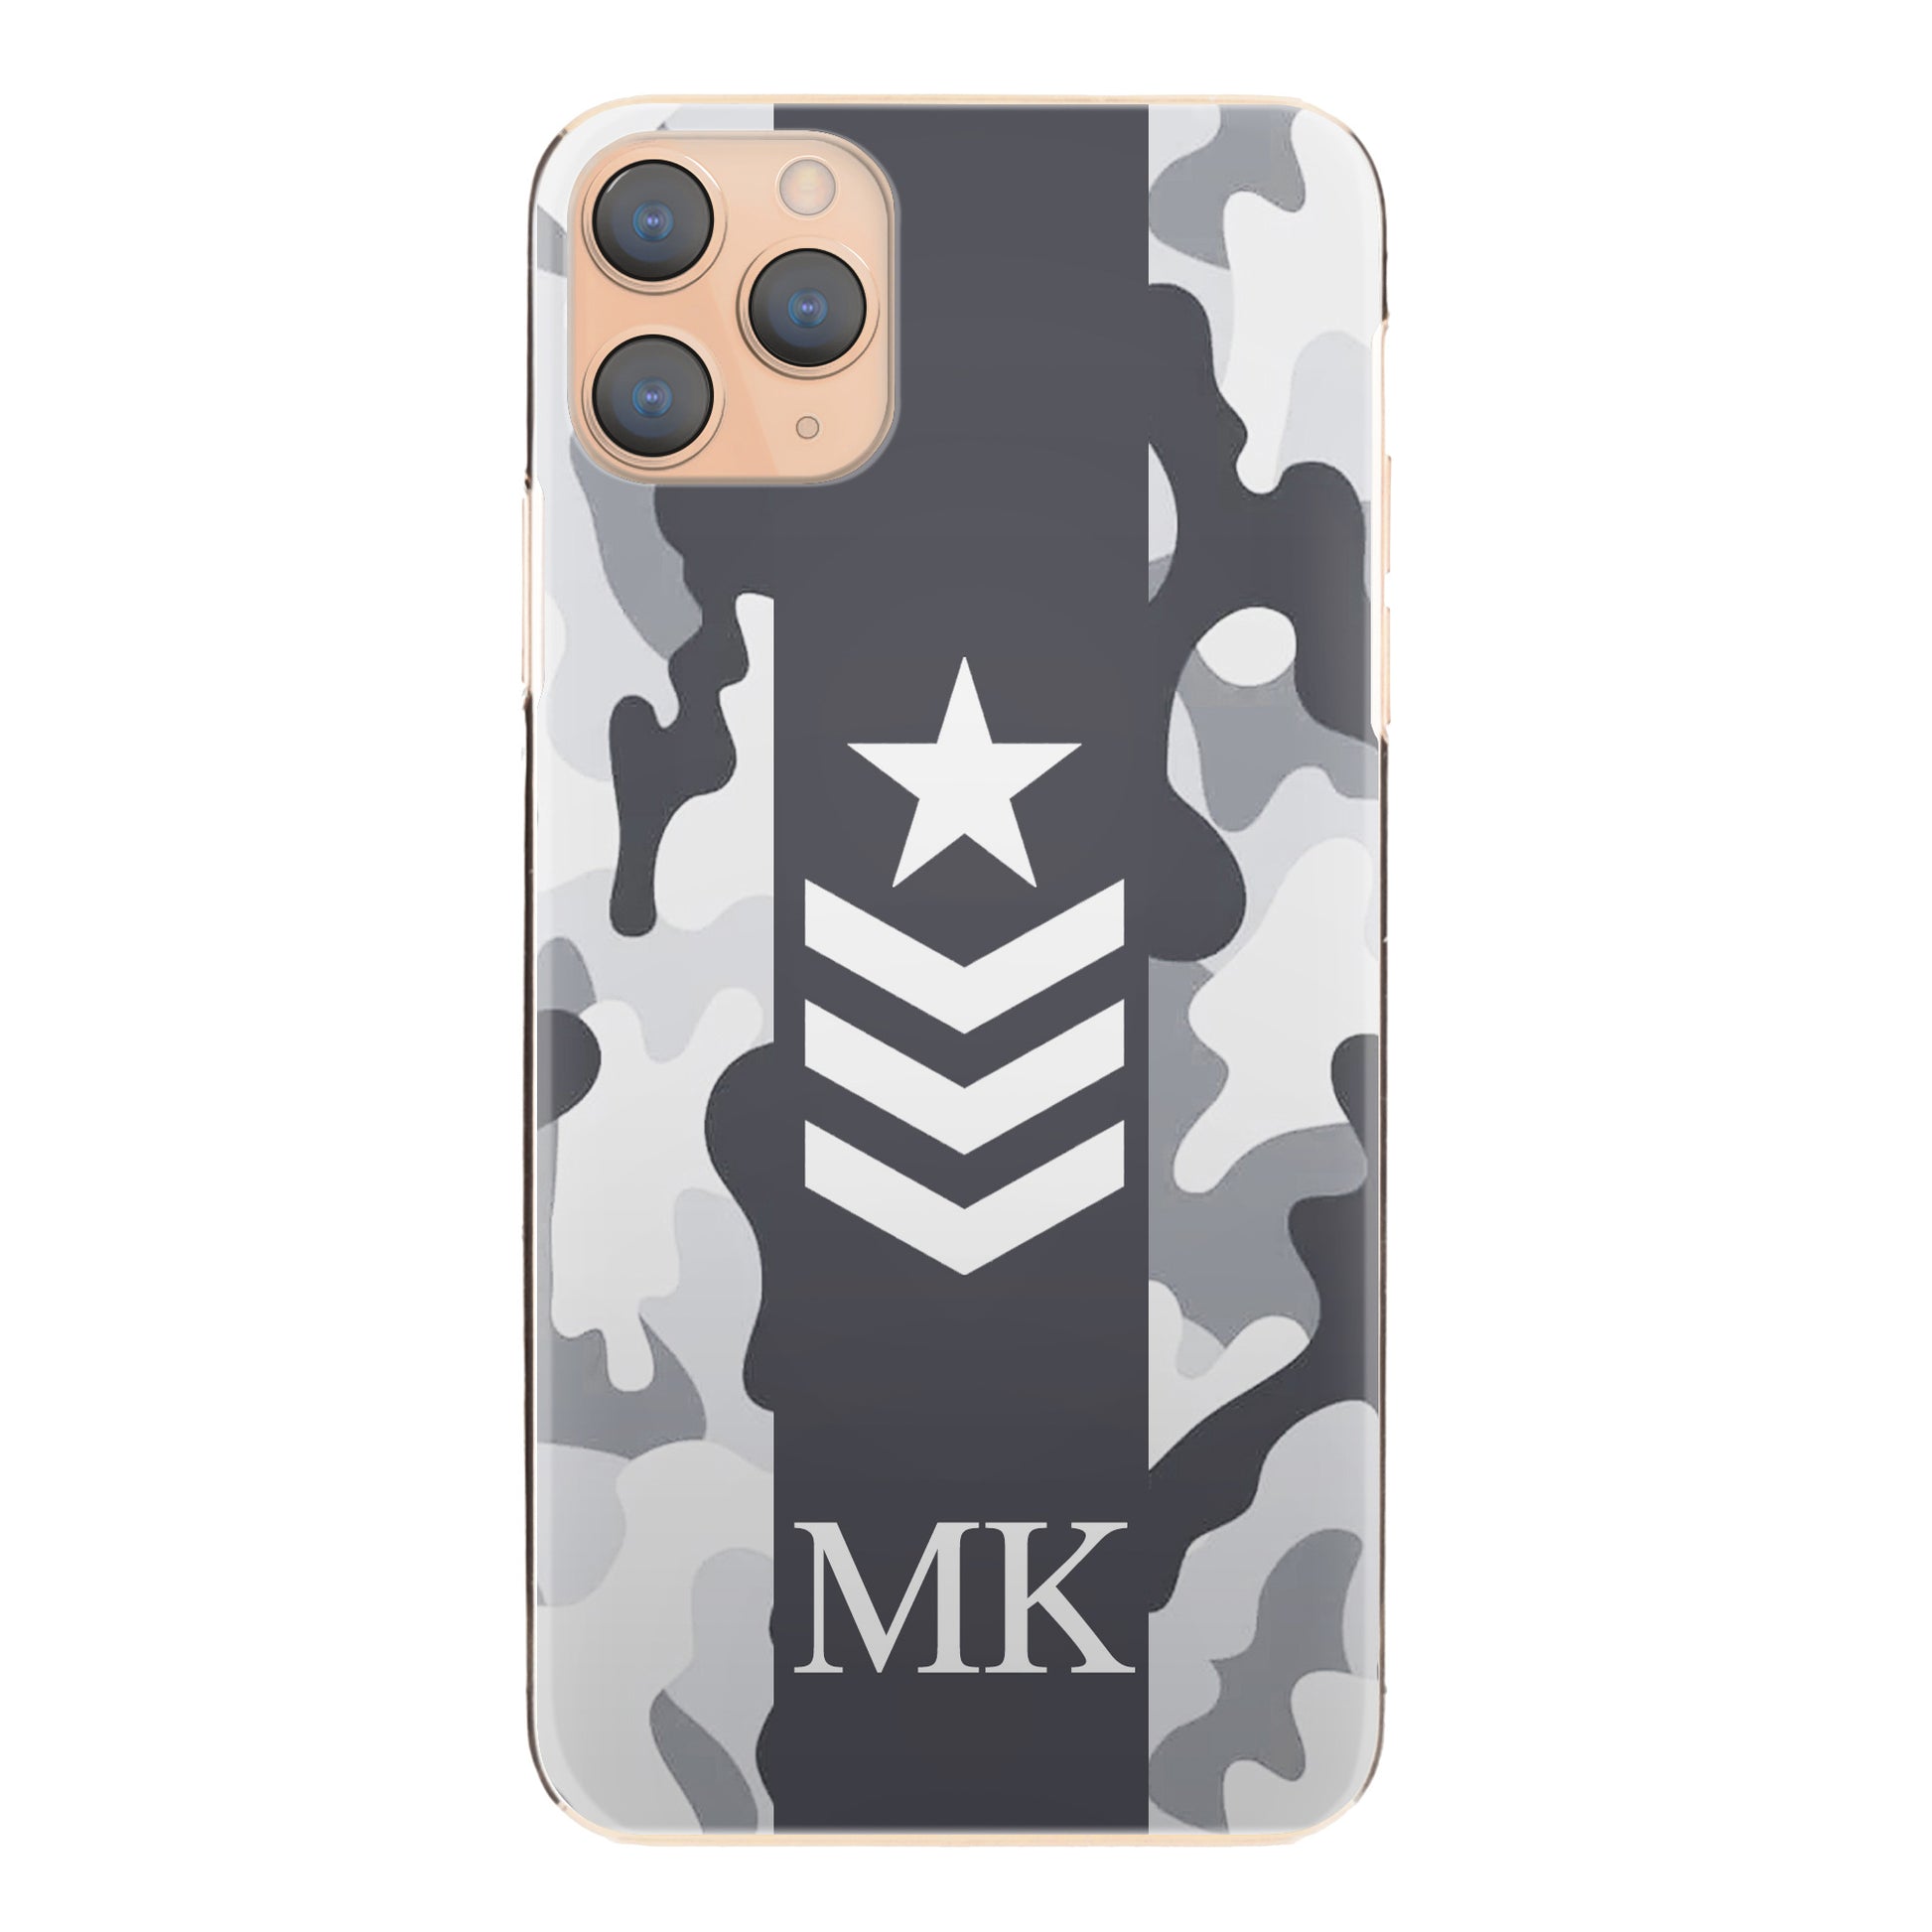 Personalised Honor Phone Hard Case with Initials and Army Rank on Artic Camo